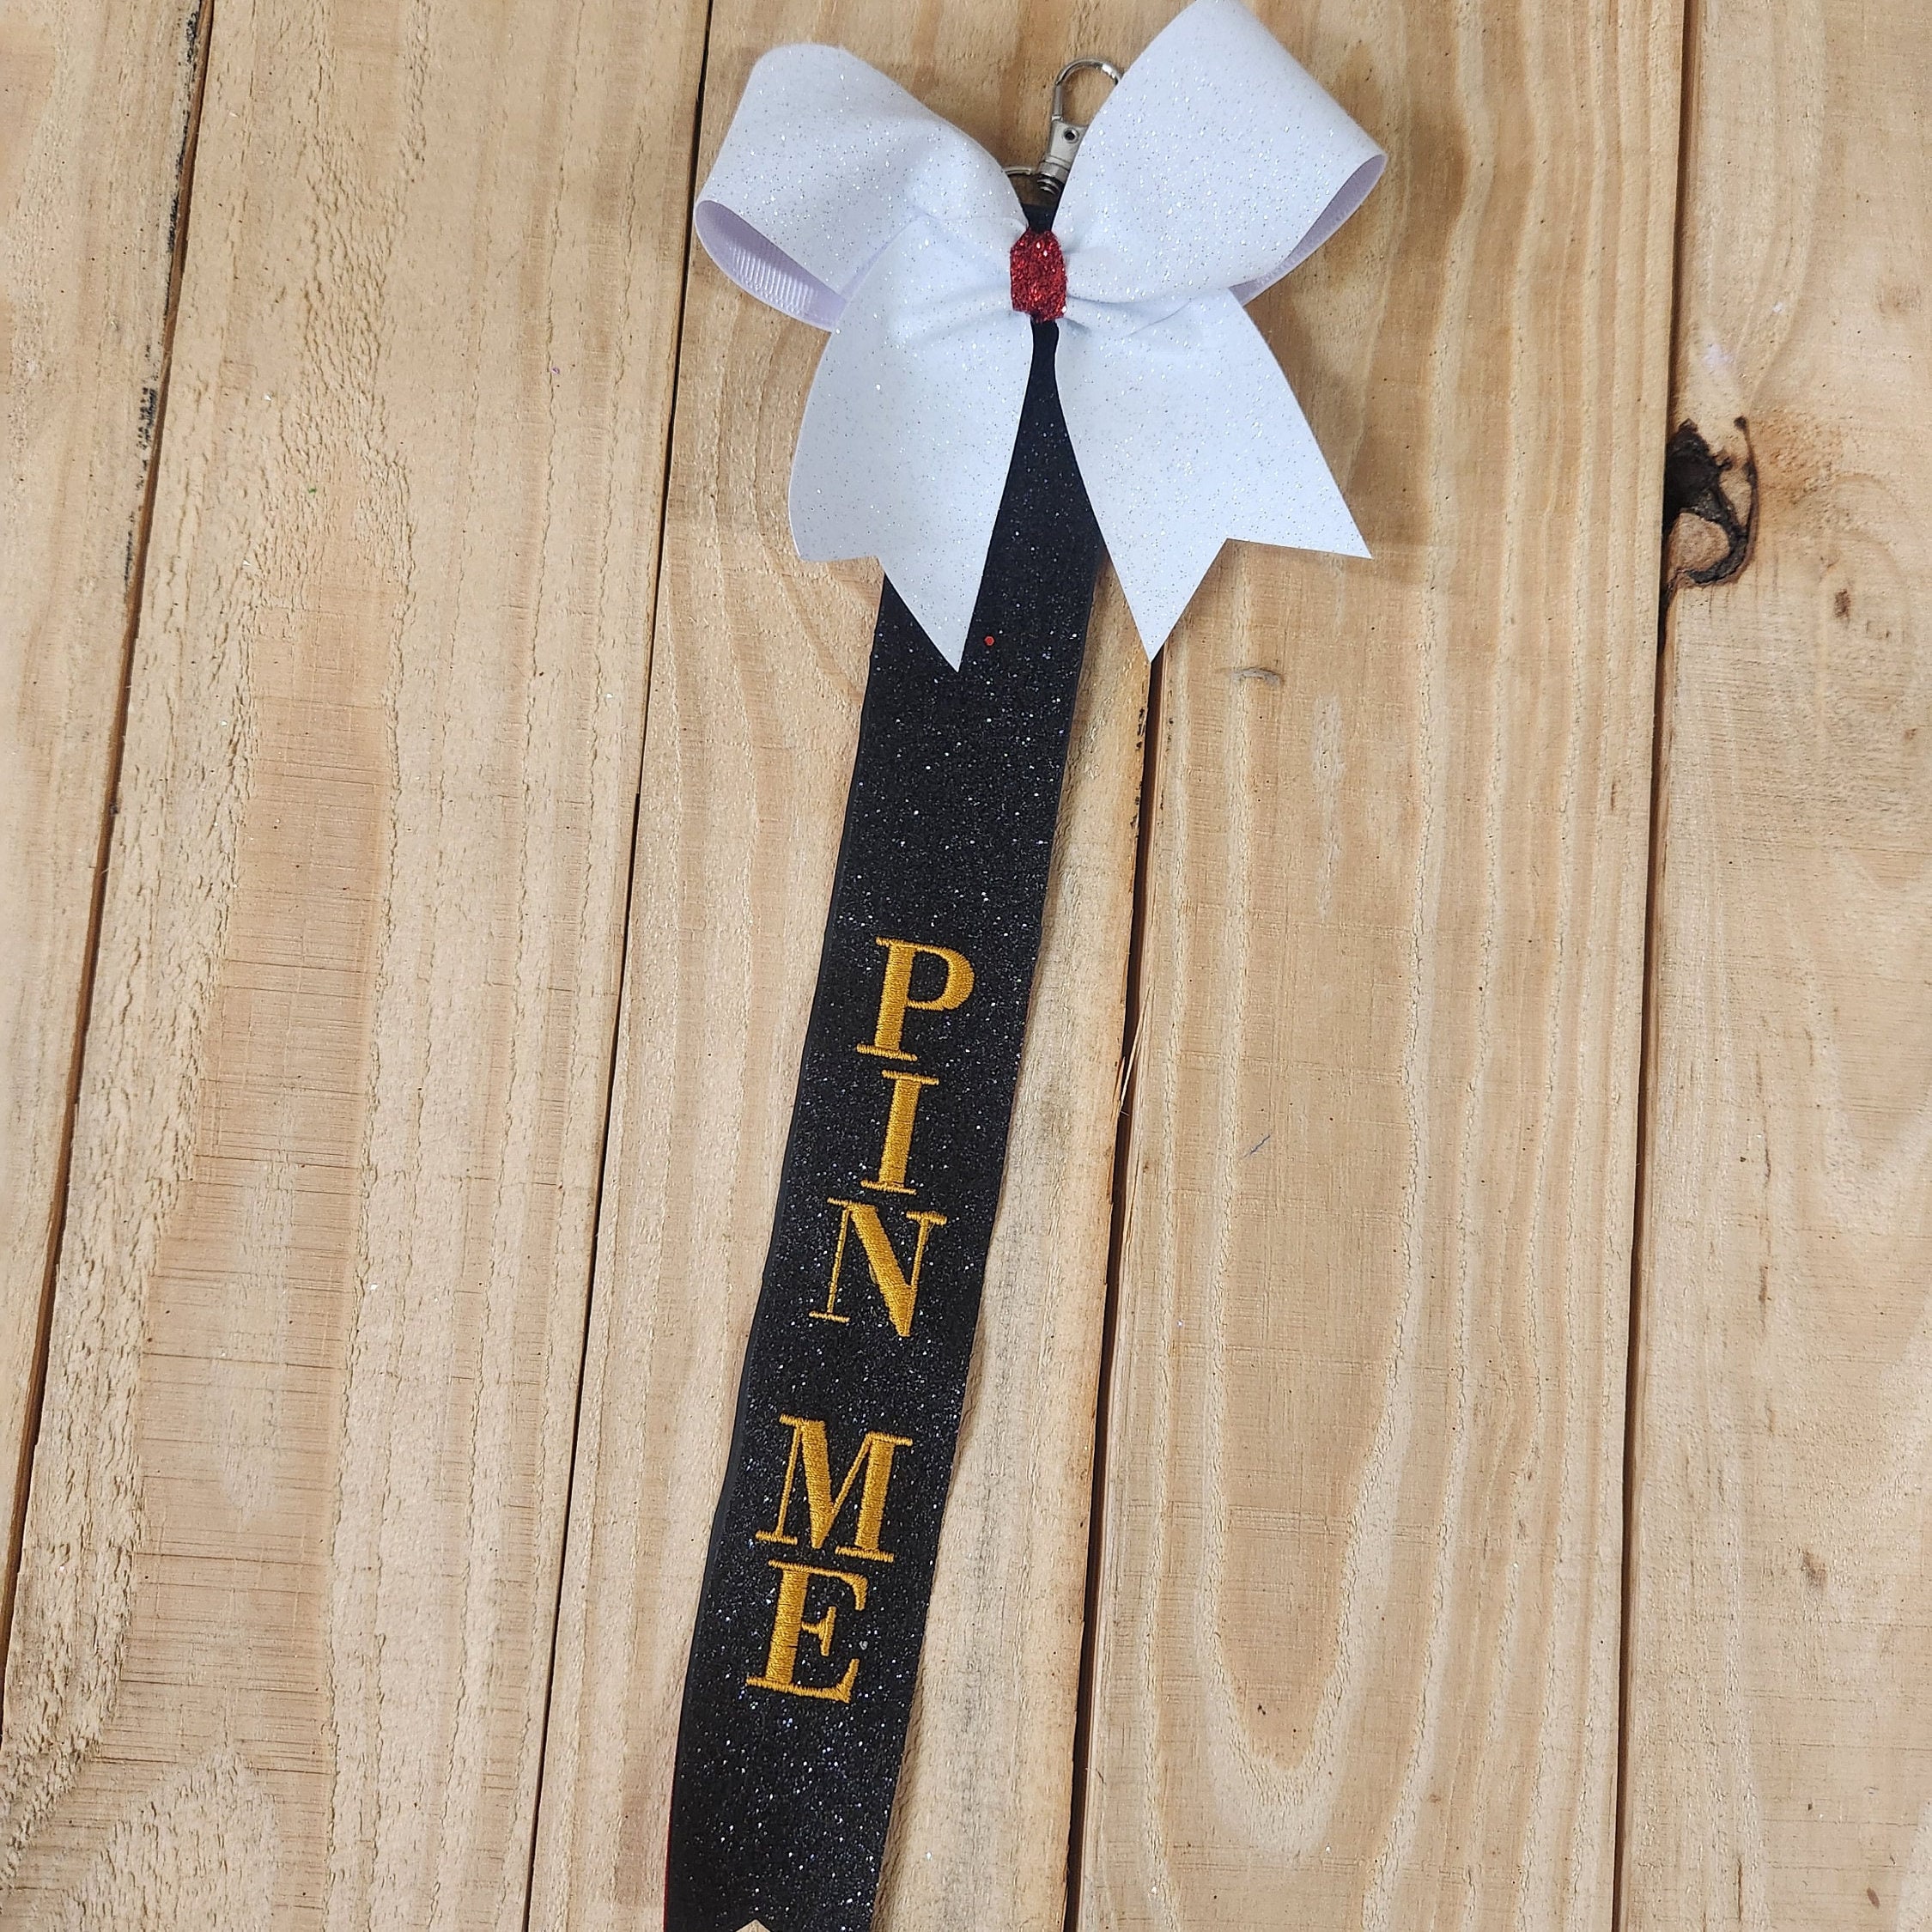 Pen Me Ribbon embroidered keychain #cheer #competition #cheermom